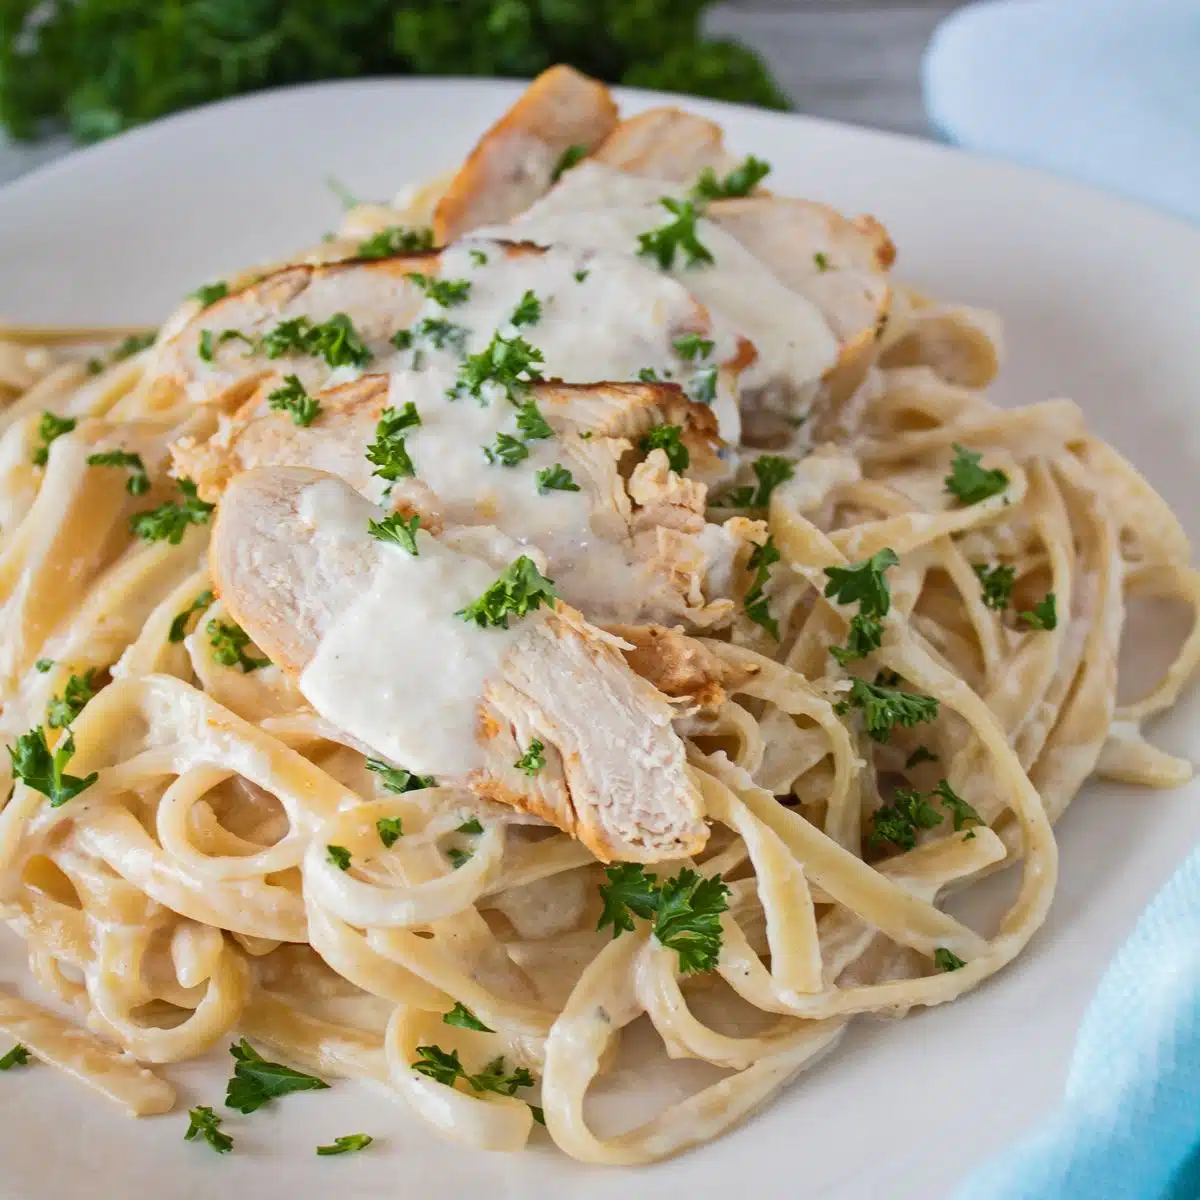 Carbonara vs alfredo sauce guide illustrated with a square image of grilled chicken fettuccine alfredo on white plate.